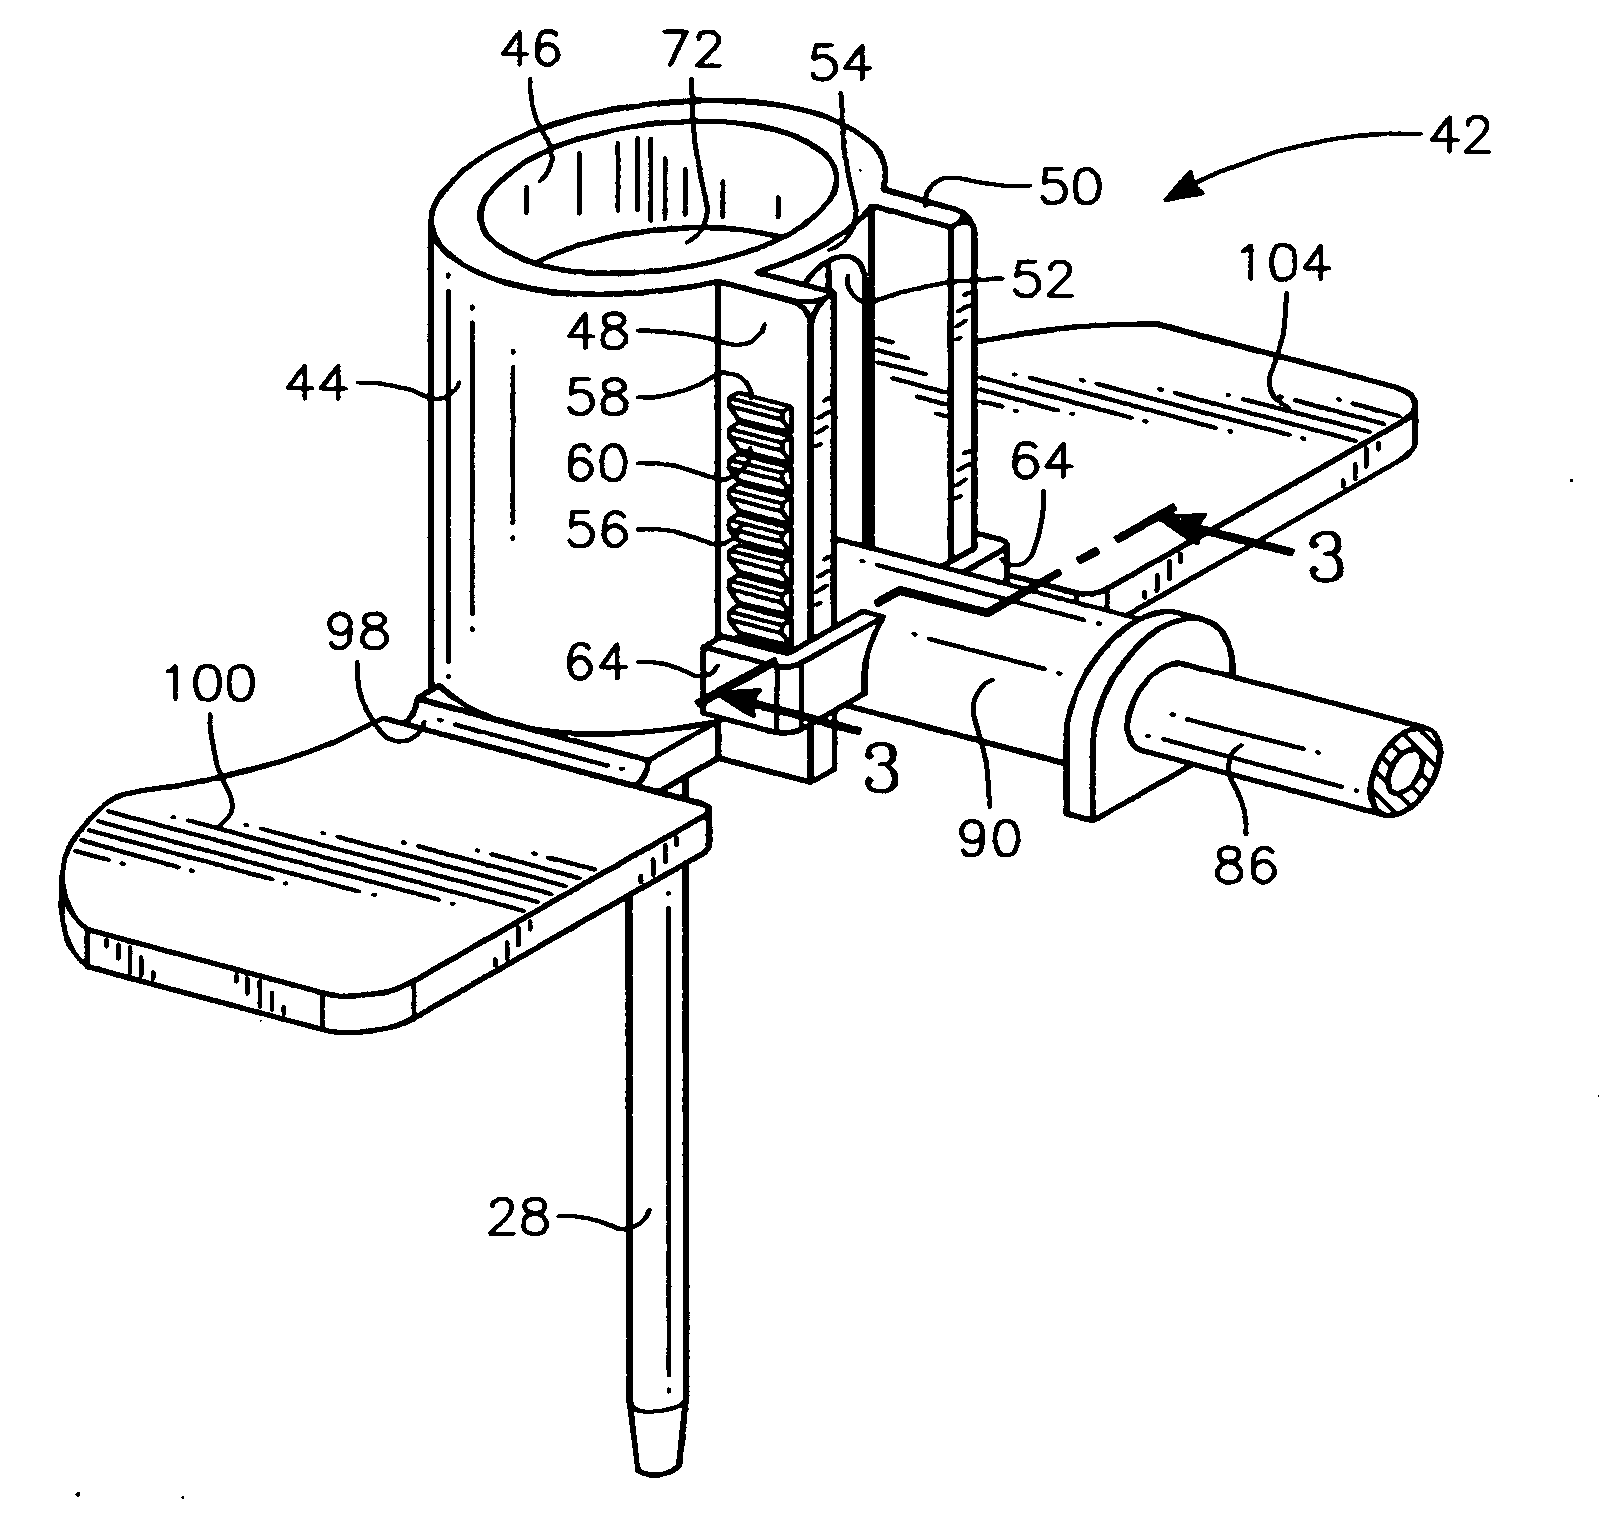 Adjustable medication infusion injection apparatus